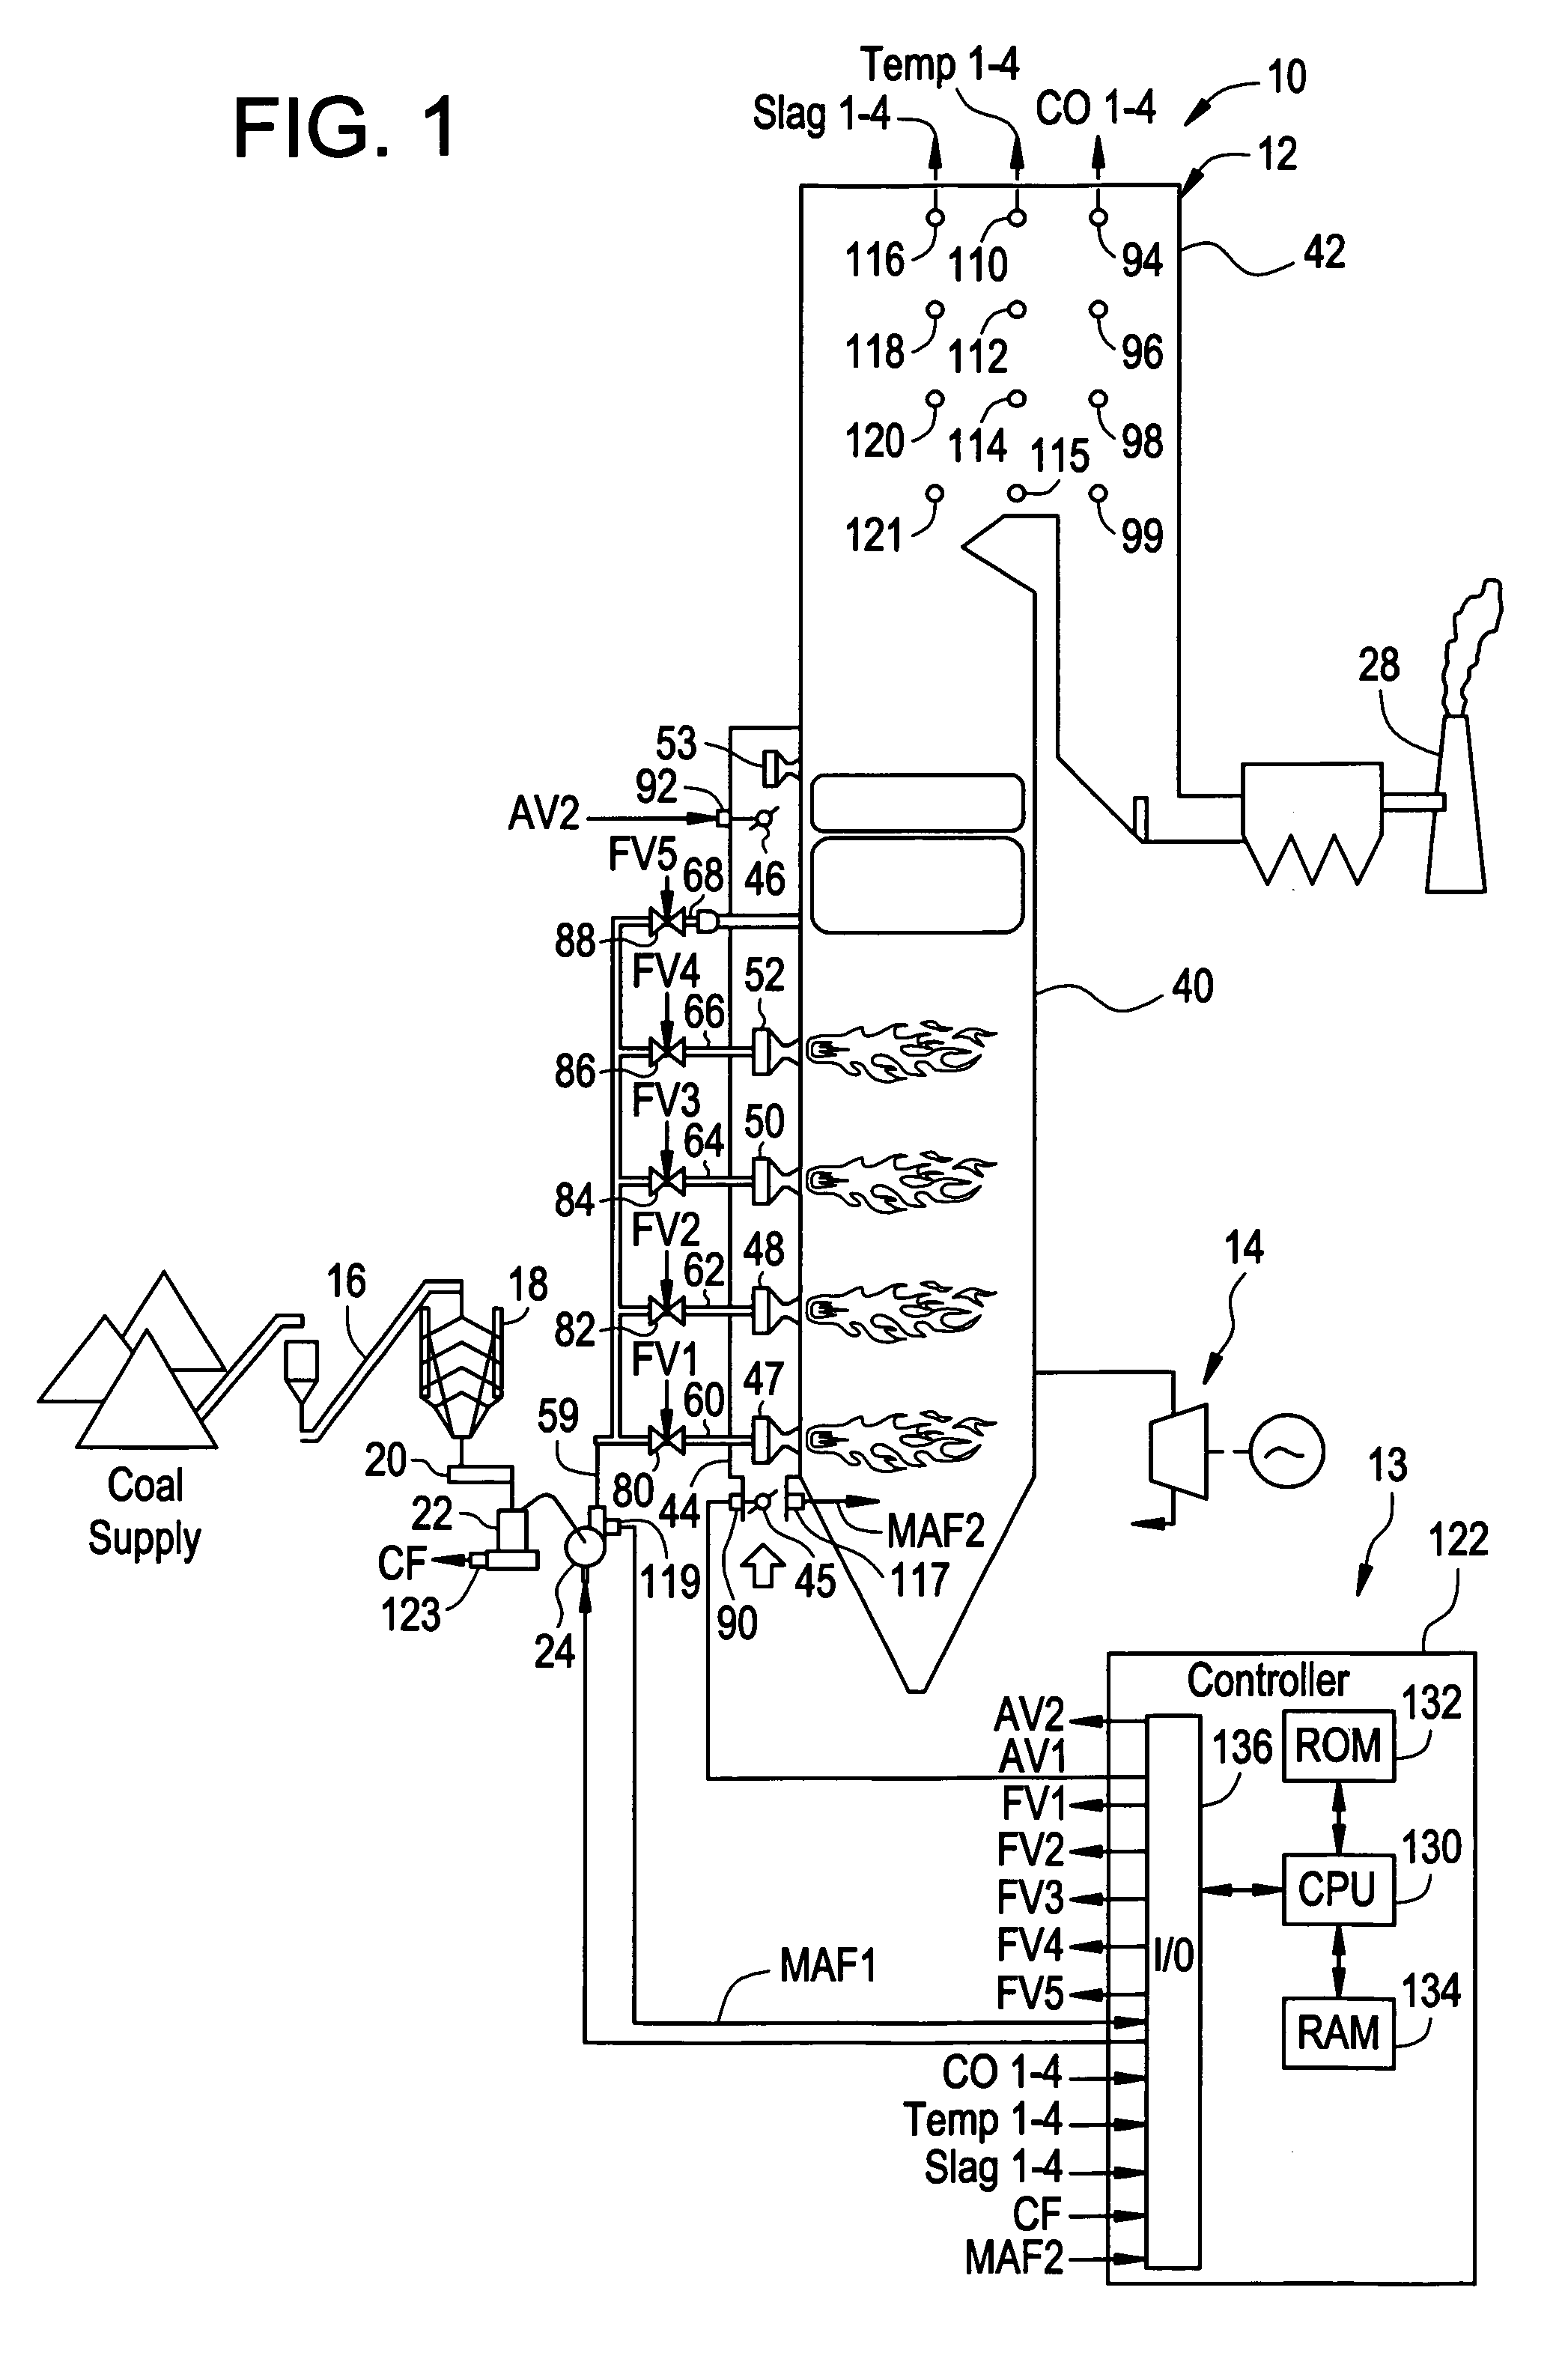 System, method, and article of manufacture for adjusting temperature levels at predetermined locations in a boiler system